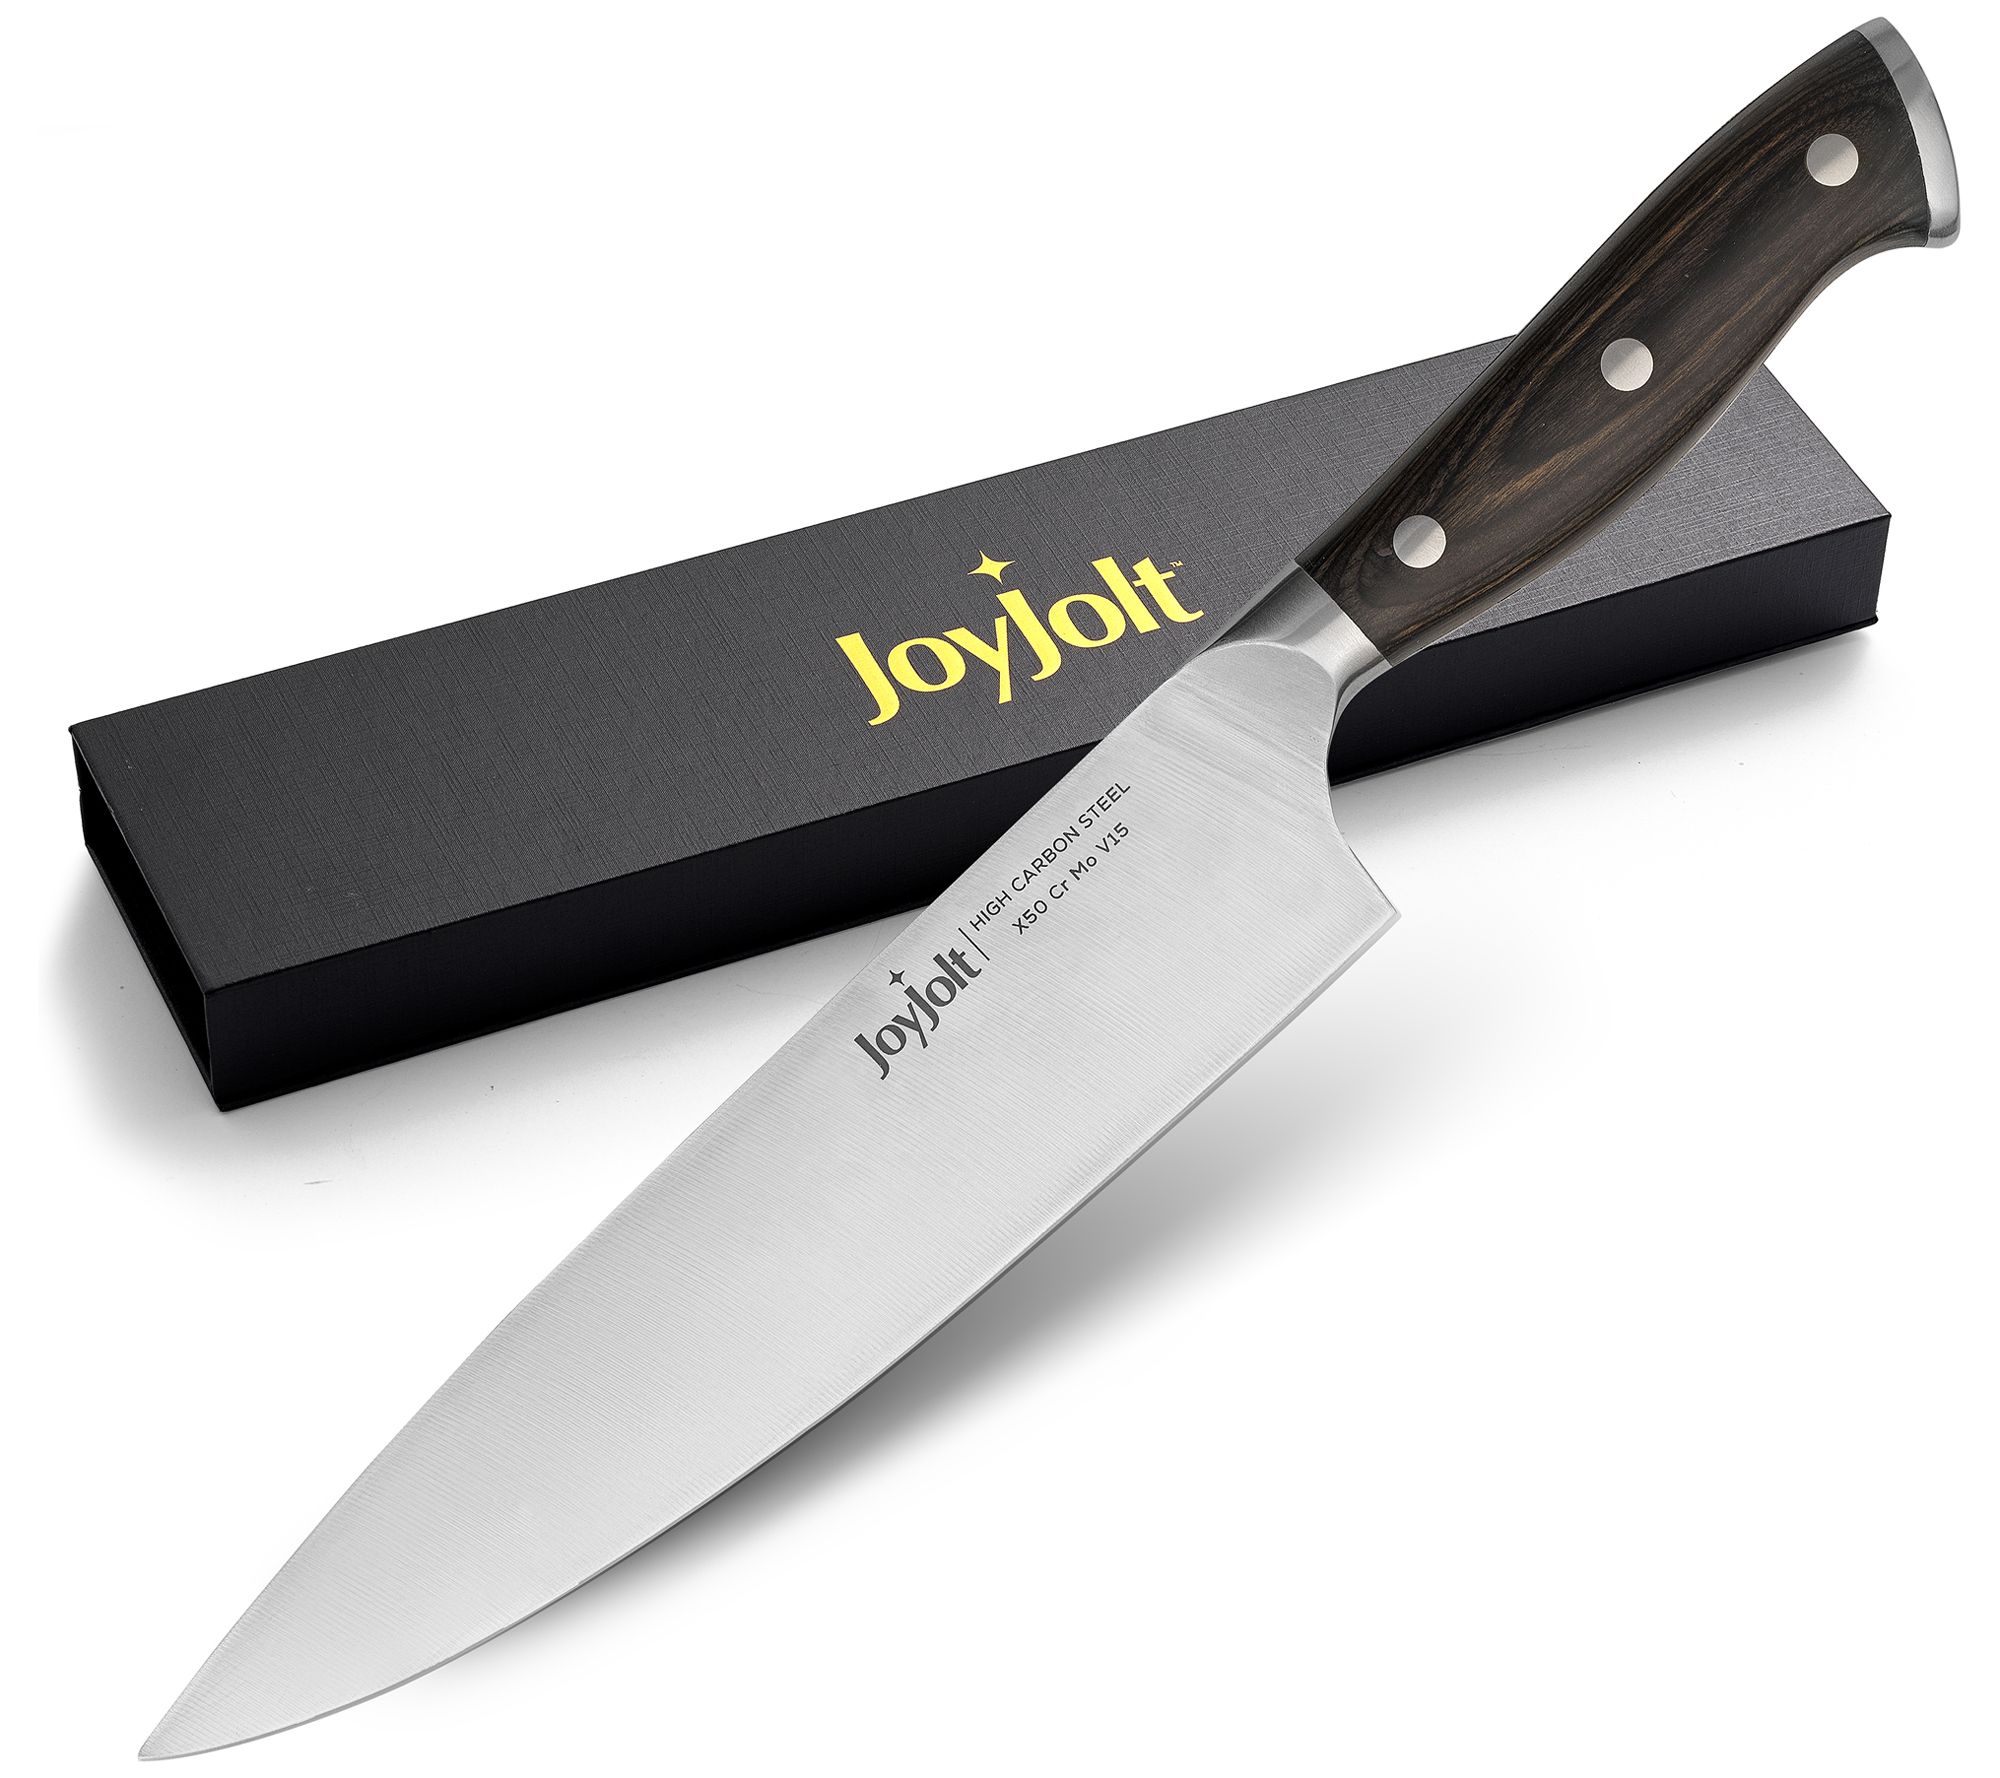 JoyJolt 12pc Kitchen Knives Set (Black). Chefs Knife Set with Sheath  Covers. Chef, Butcher, Bread, Slicing, Santoku, Utility and Paring Home And